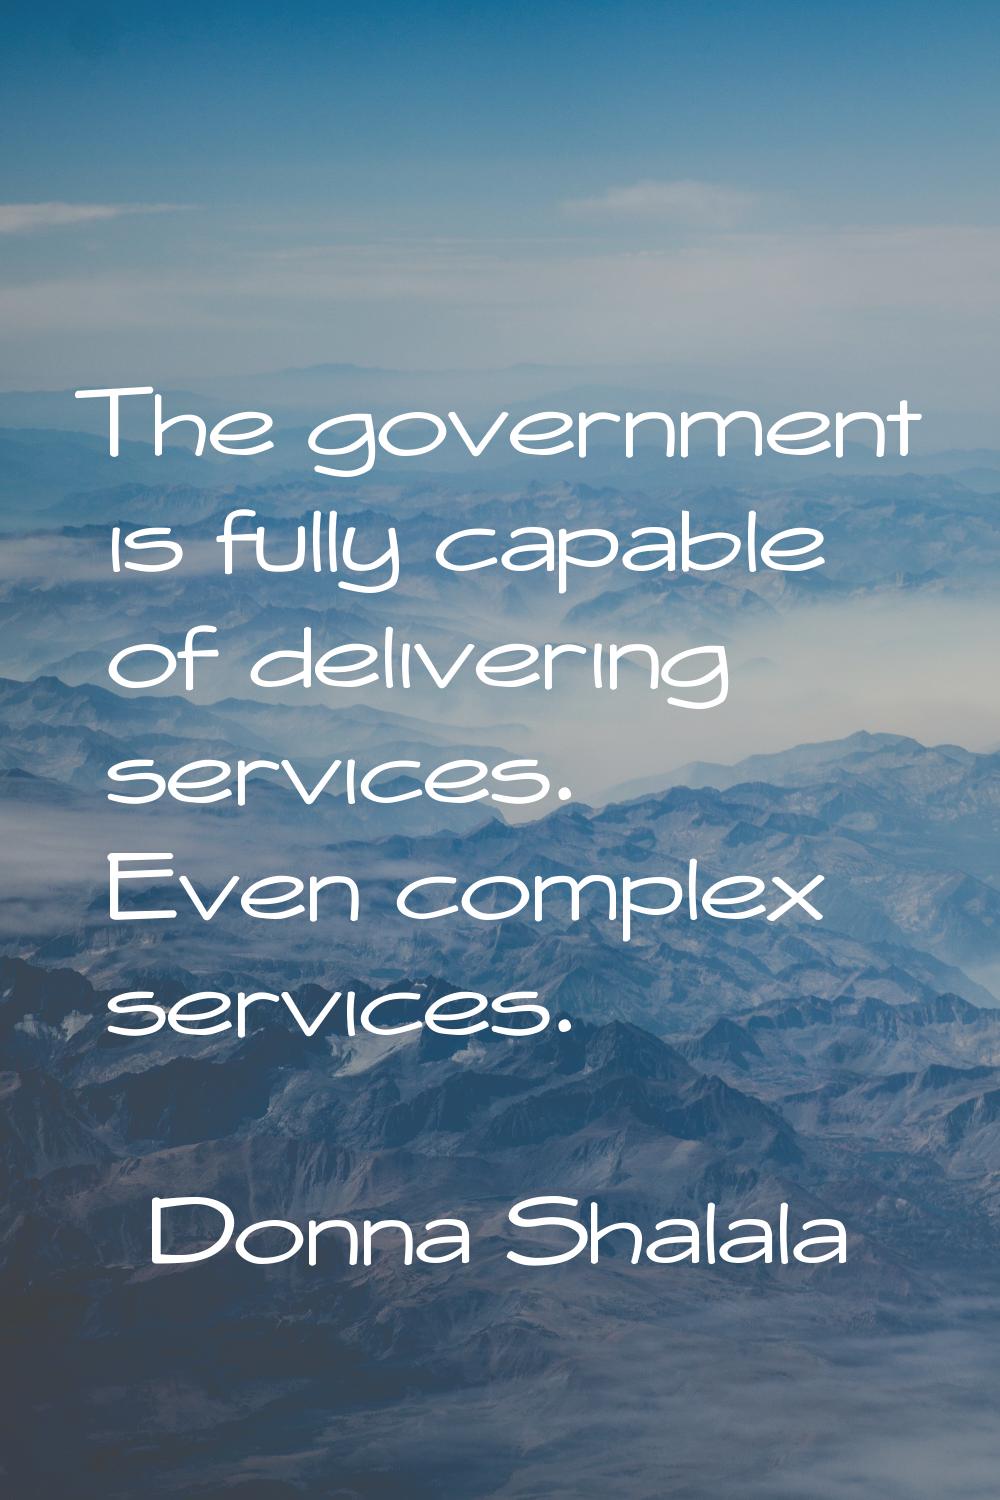 The government is fully capable of delivering services. Even complex services.